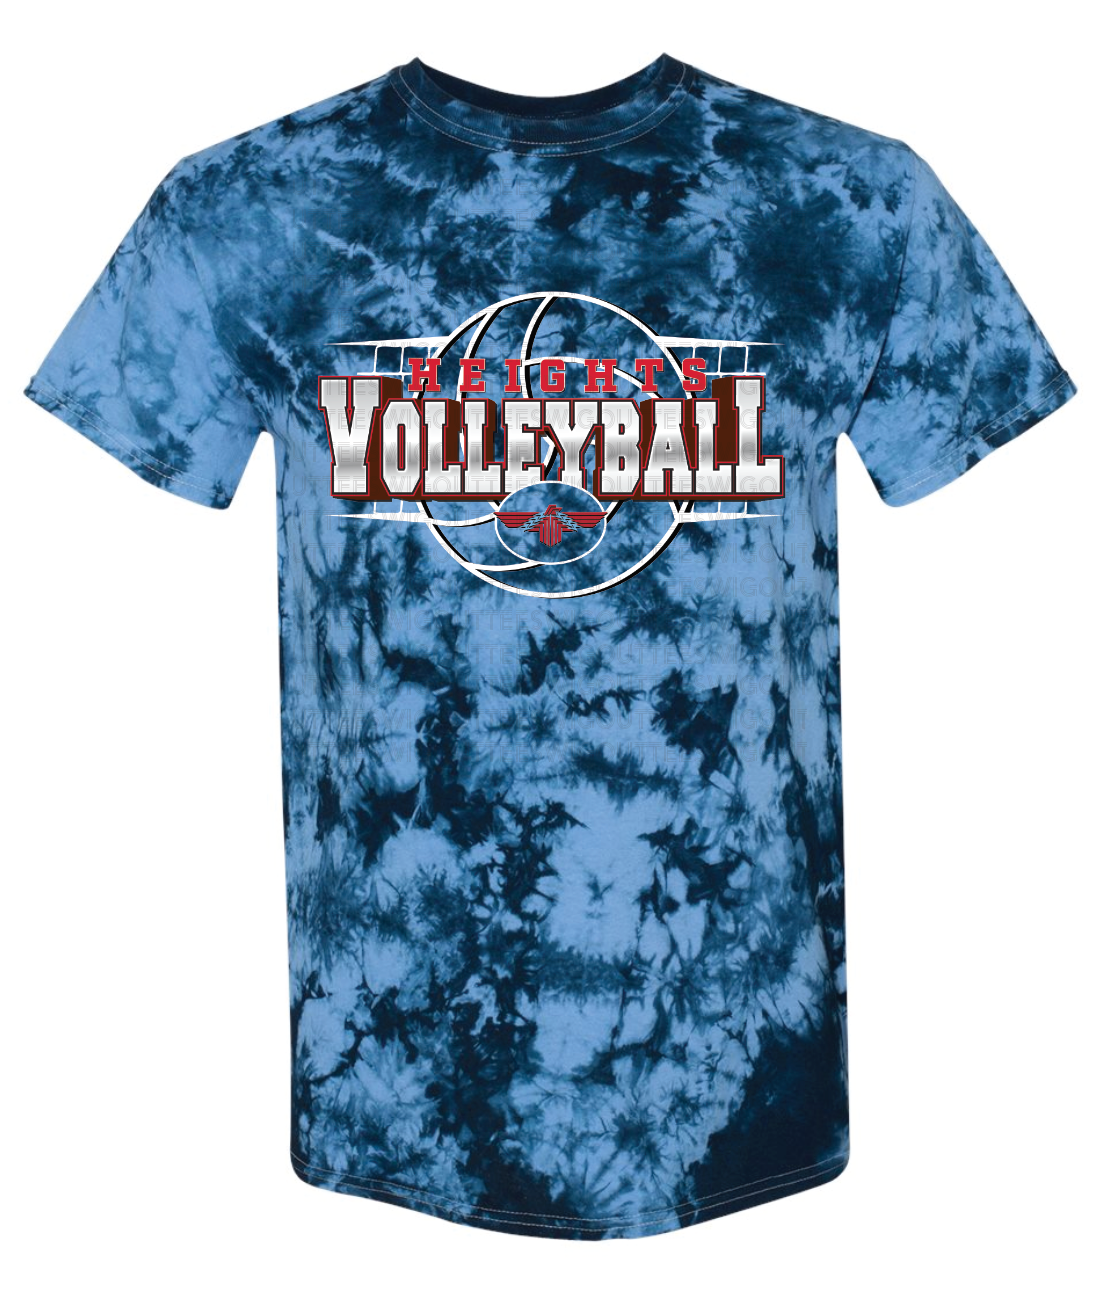 Heights Volleyball Crystal Tie Dye T-shirt